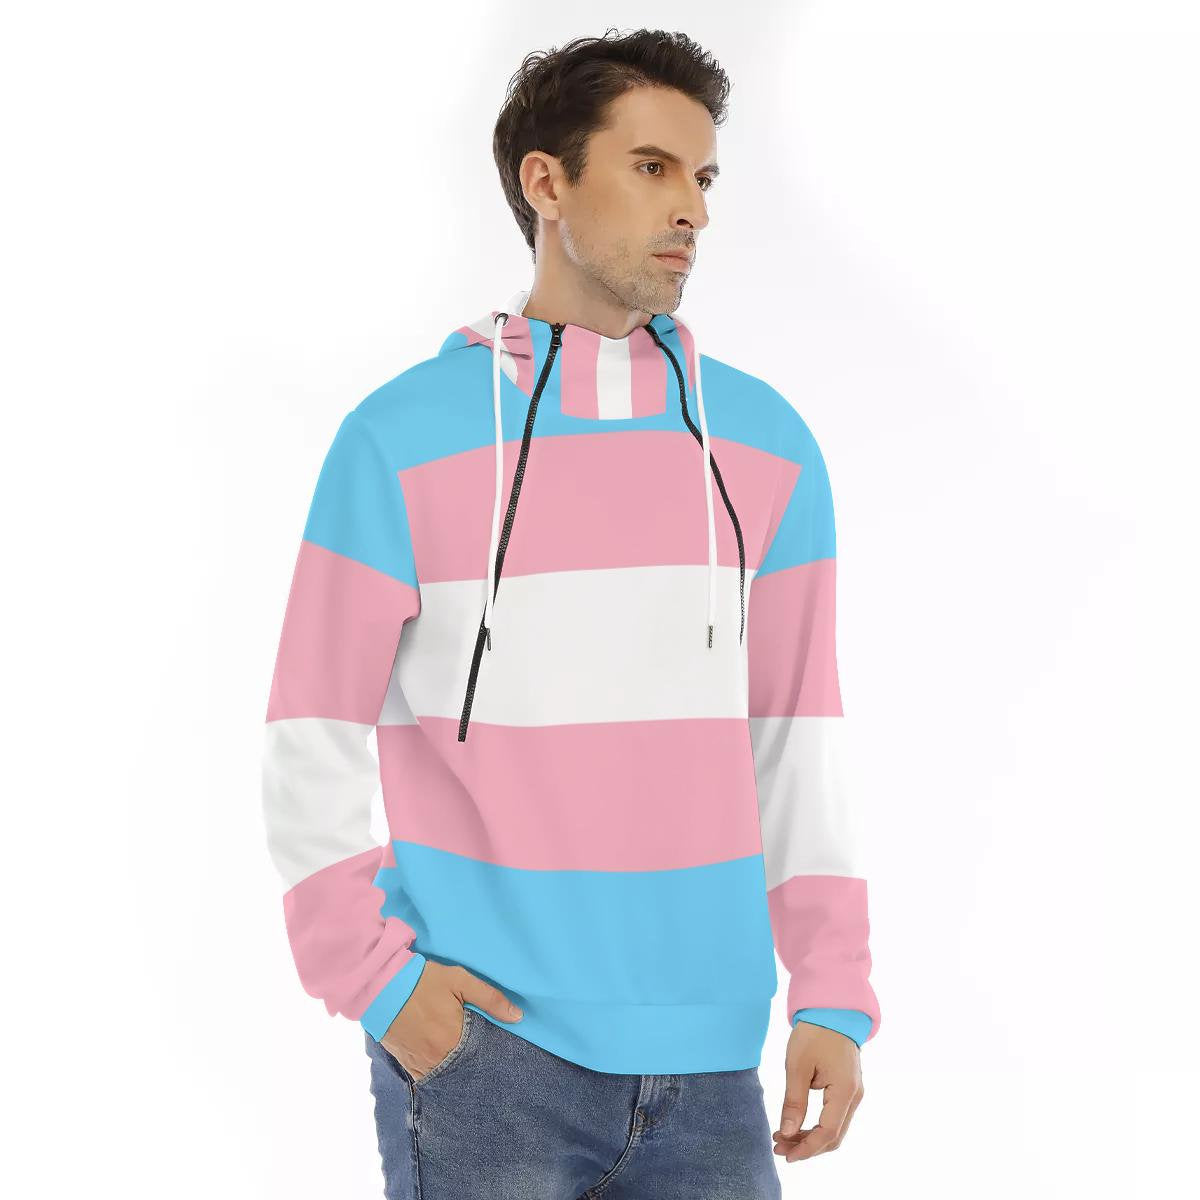 NEW Trans Colours Double Zipper Comfy Hoodie Trans Apparel & Gift Ideas for Transwomen, Family and Friends